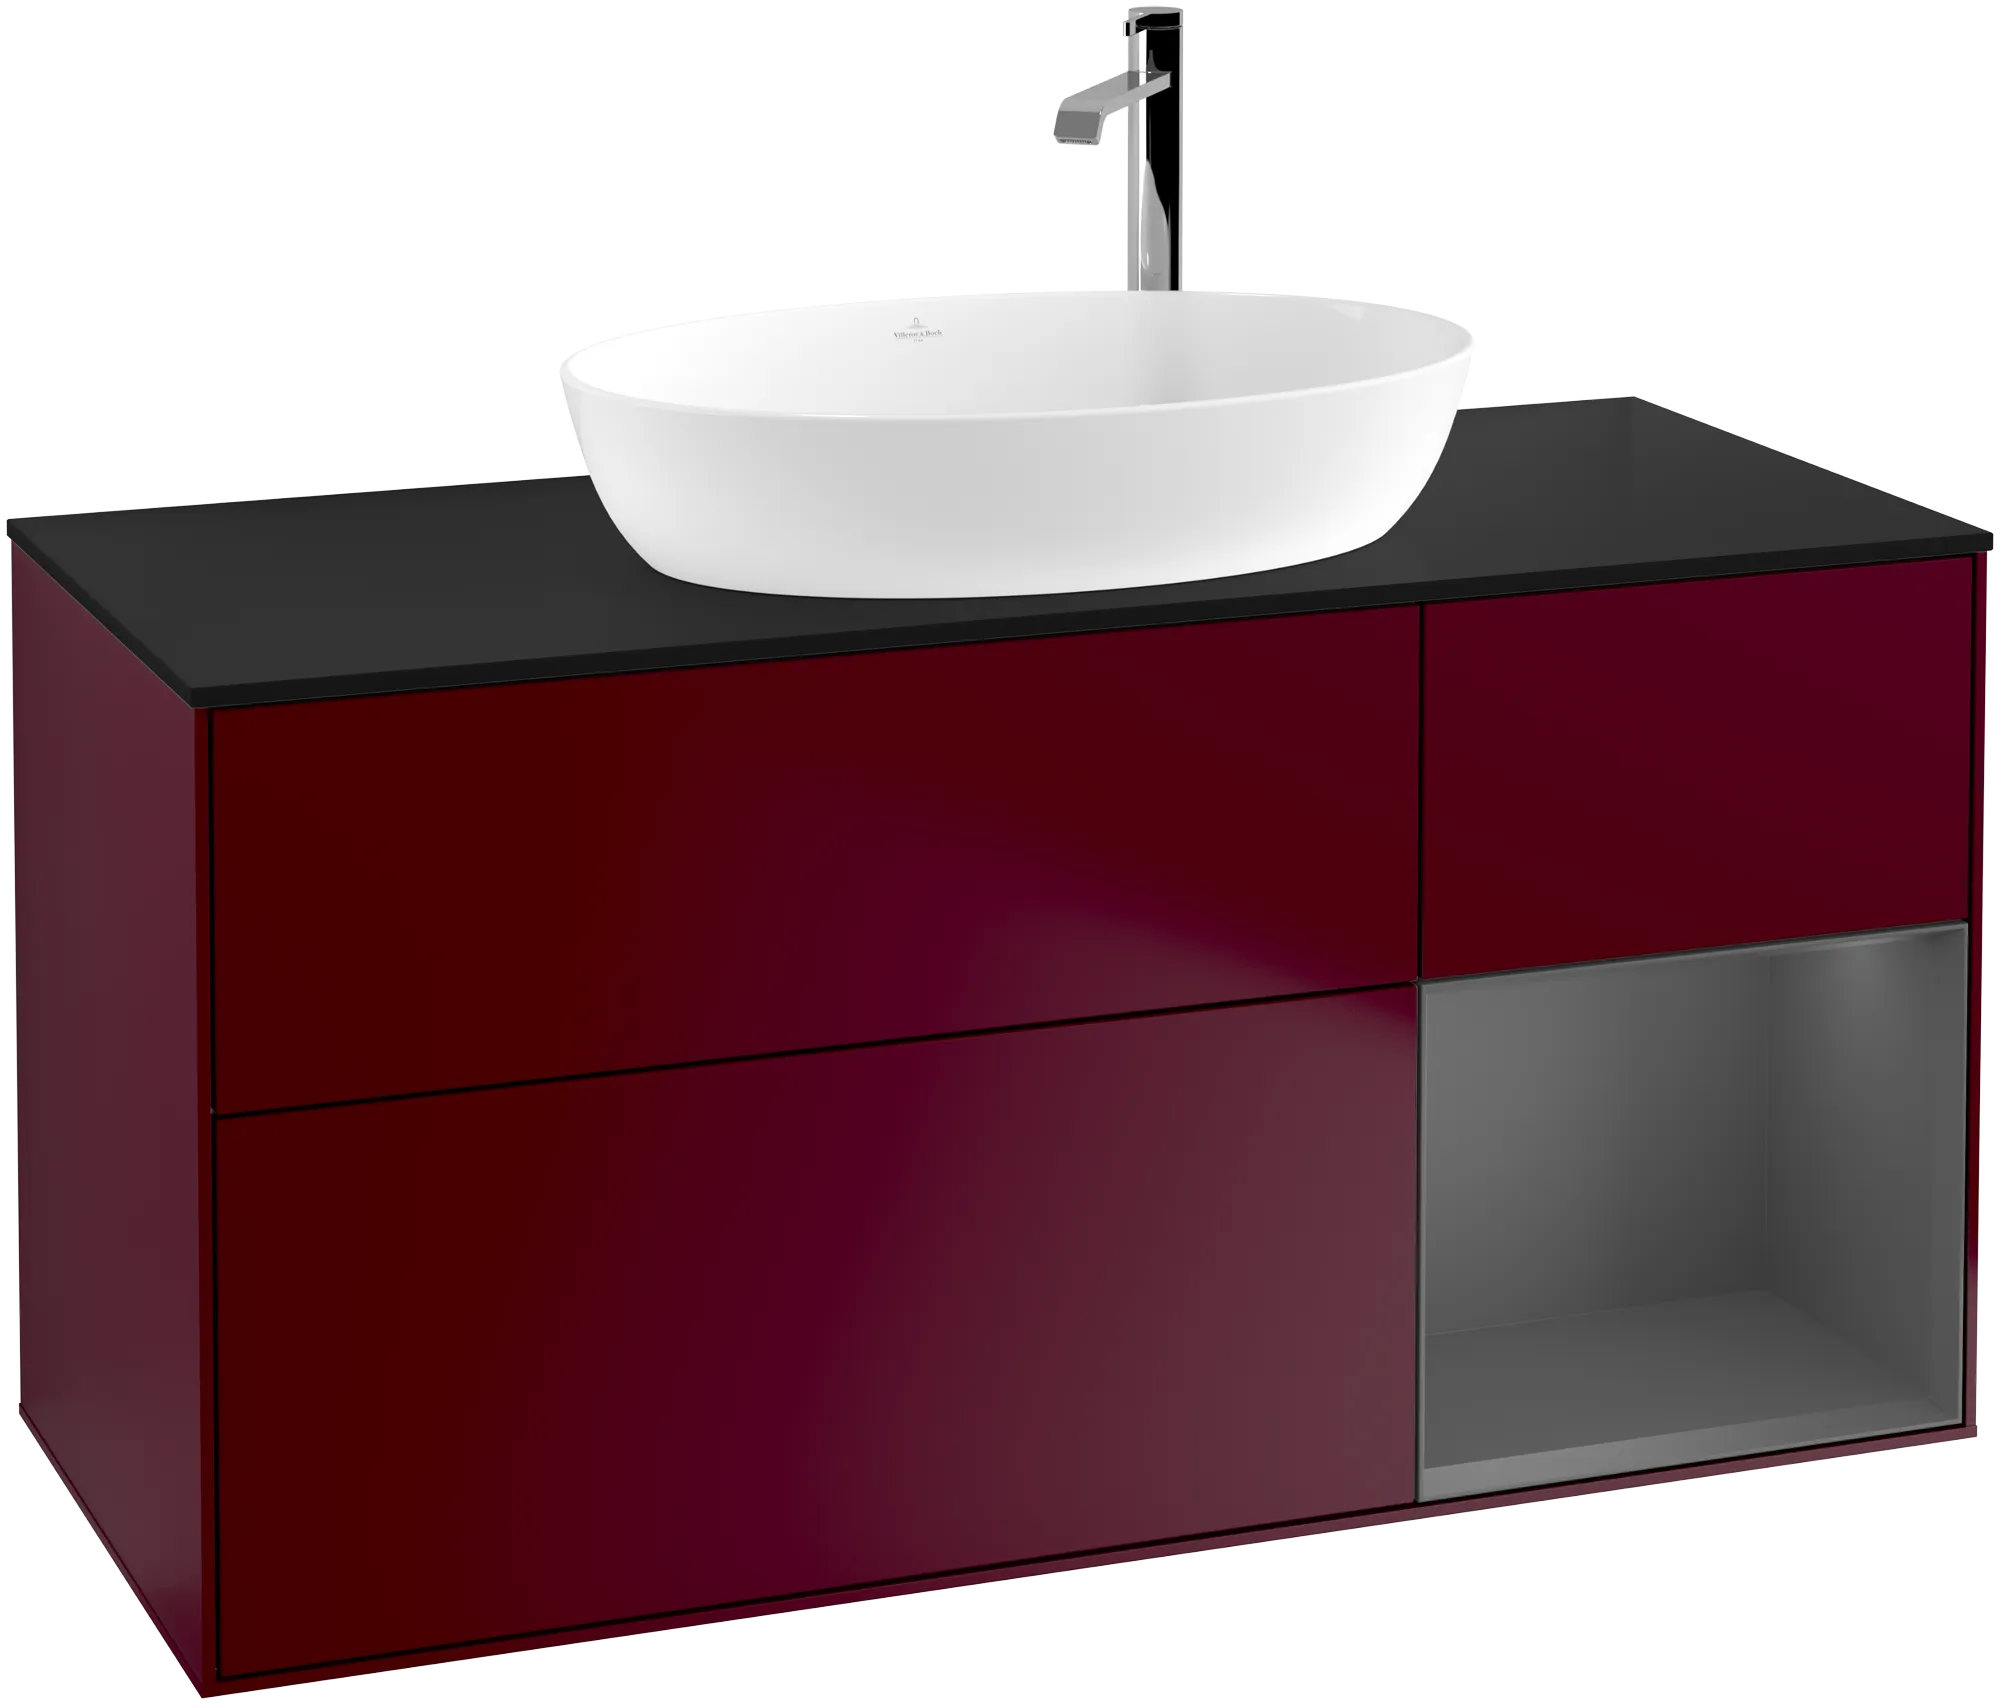 VILLEROY BOCH Finion Vanity unit, with lighting, 3 pull-out compartments, 1200 x 603 x 501 mm, Peony Matt Lacquer / Anthracite Matt Lacquer / Glass Black Matt #G952GKHB resmi